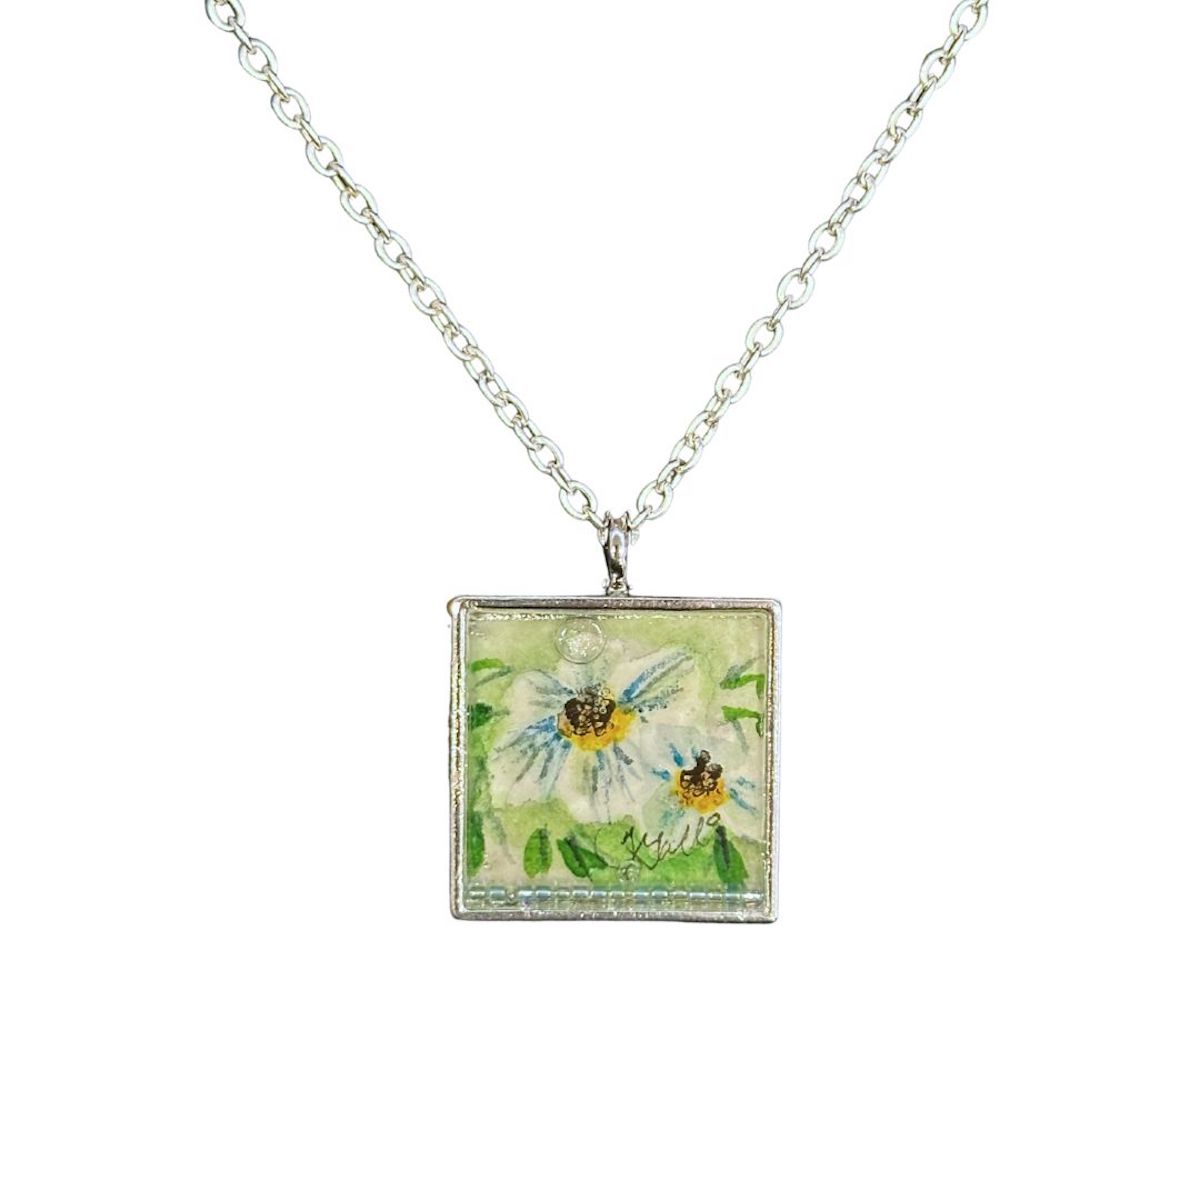 TERRI GALLO - WHITE FLORALS W/ BEADS PAINTED NECKLACE - WATERCOLOR